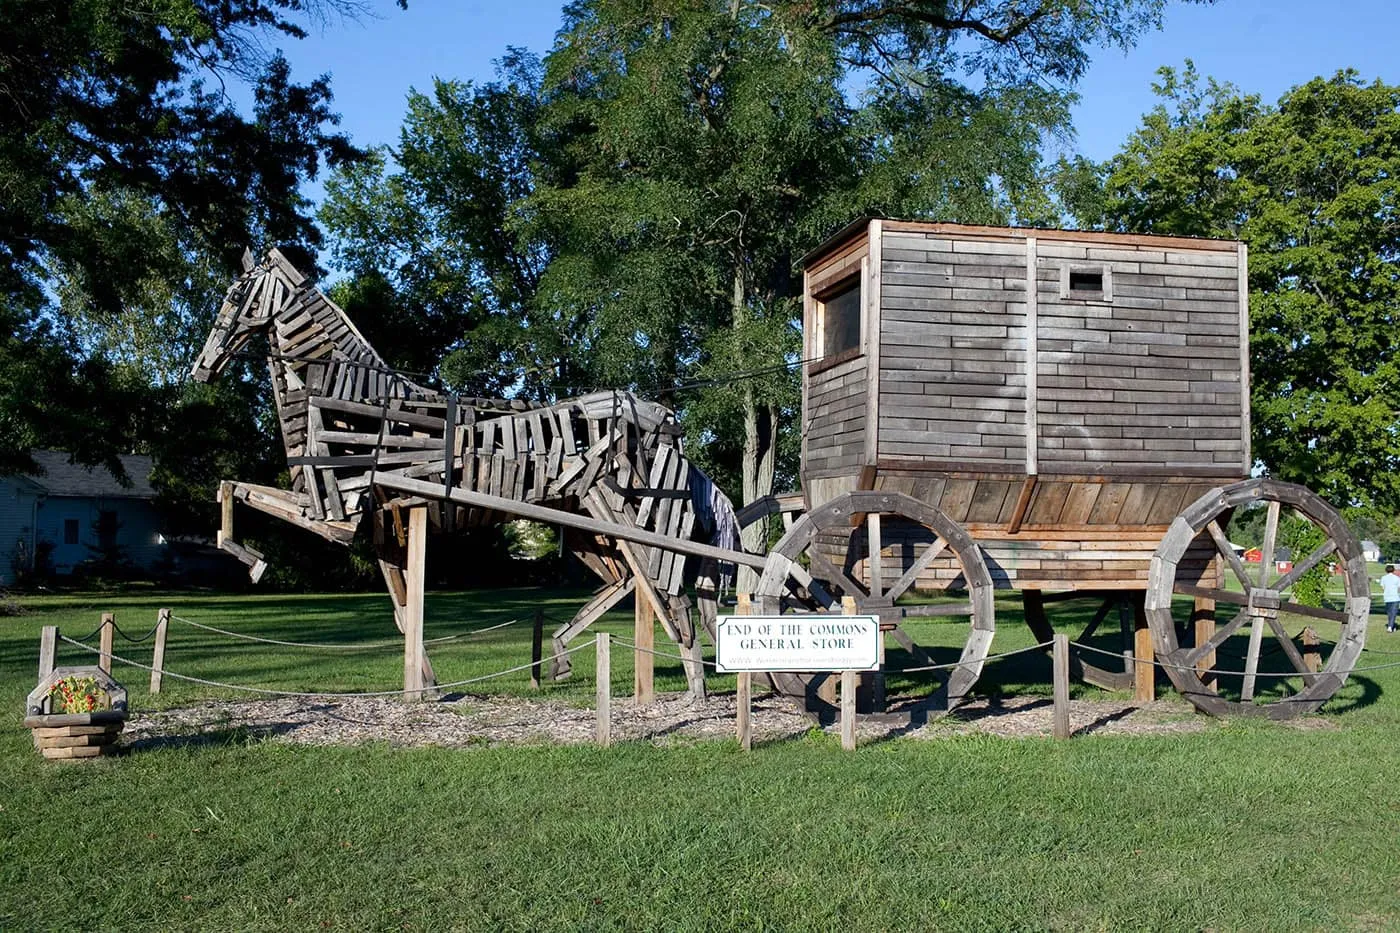 World's Largest Amish Horse and Buggy in Mesopotamia, Ohio - Ohio Roadside Attractions